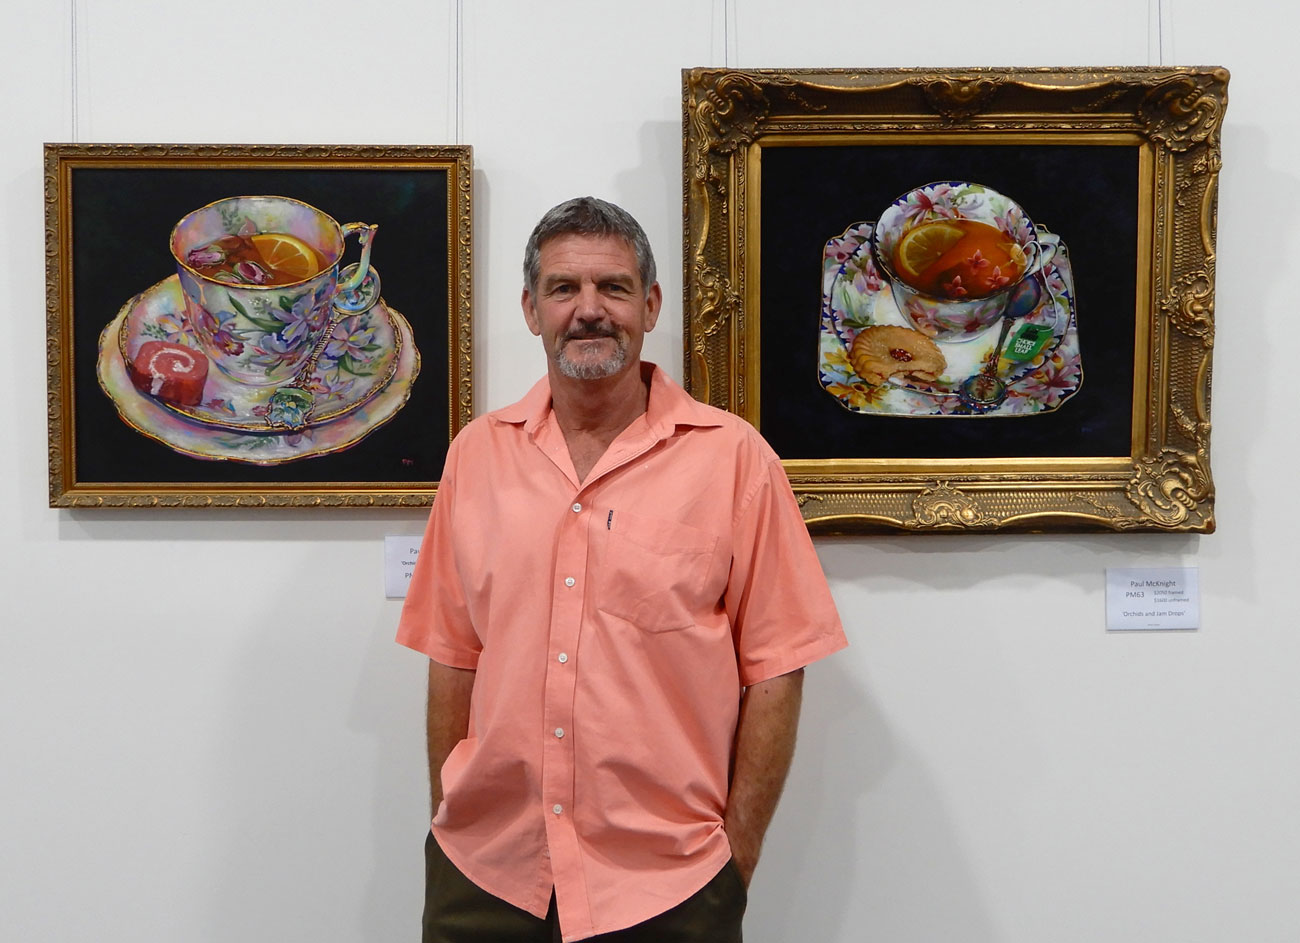 artist in front of works in gallery